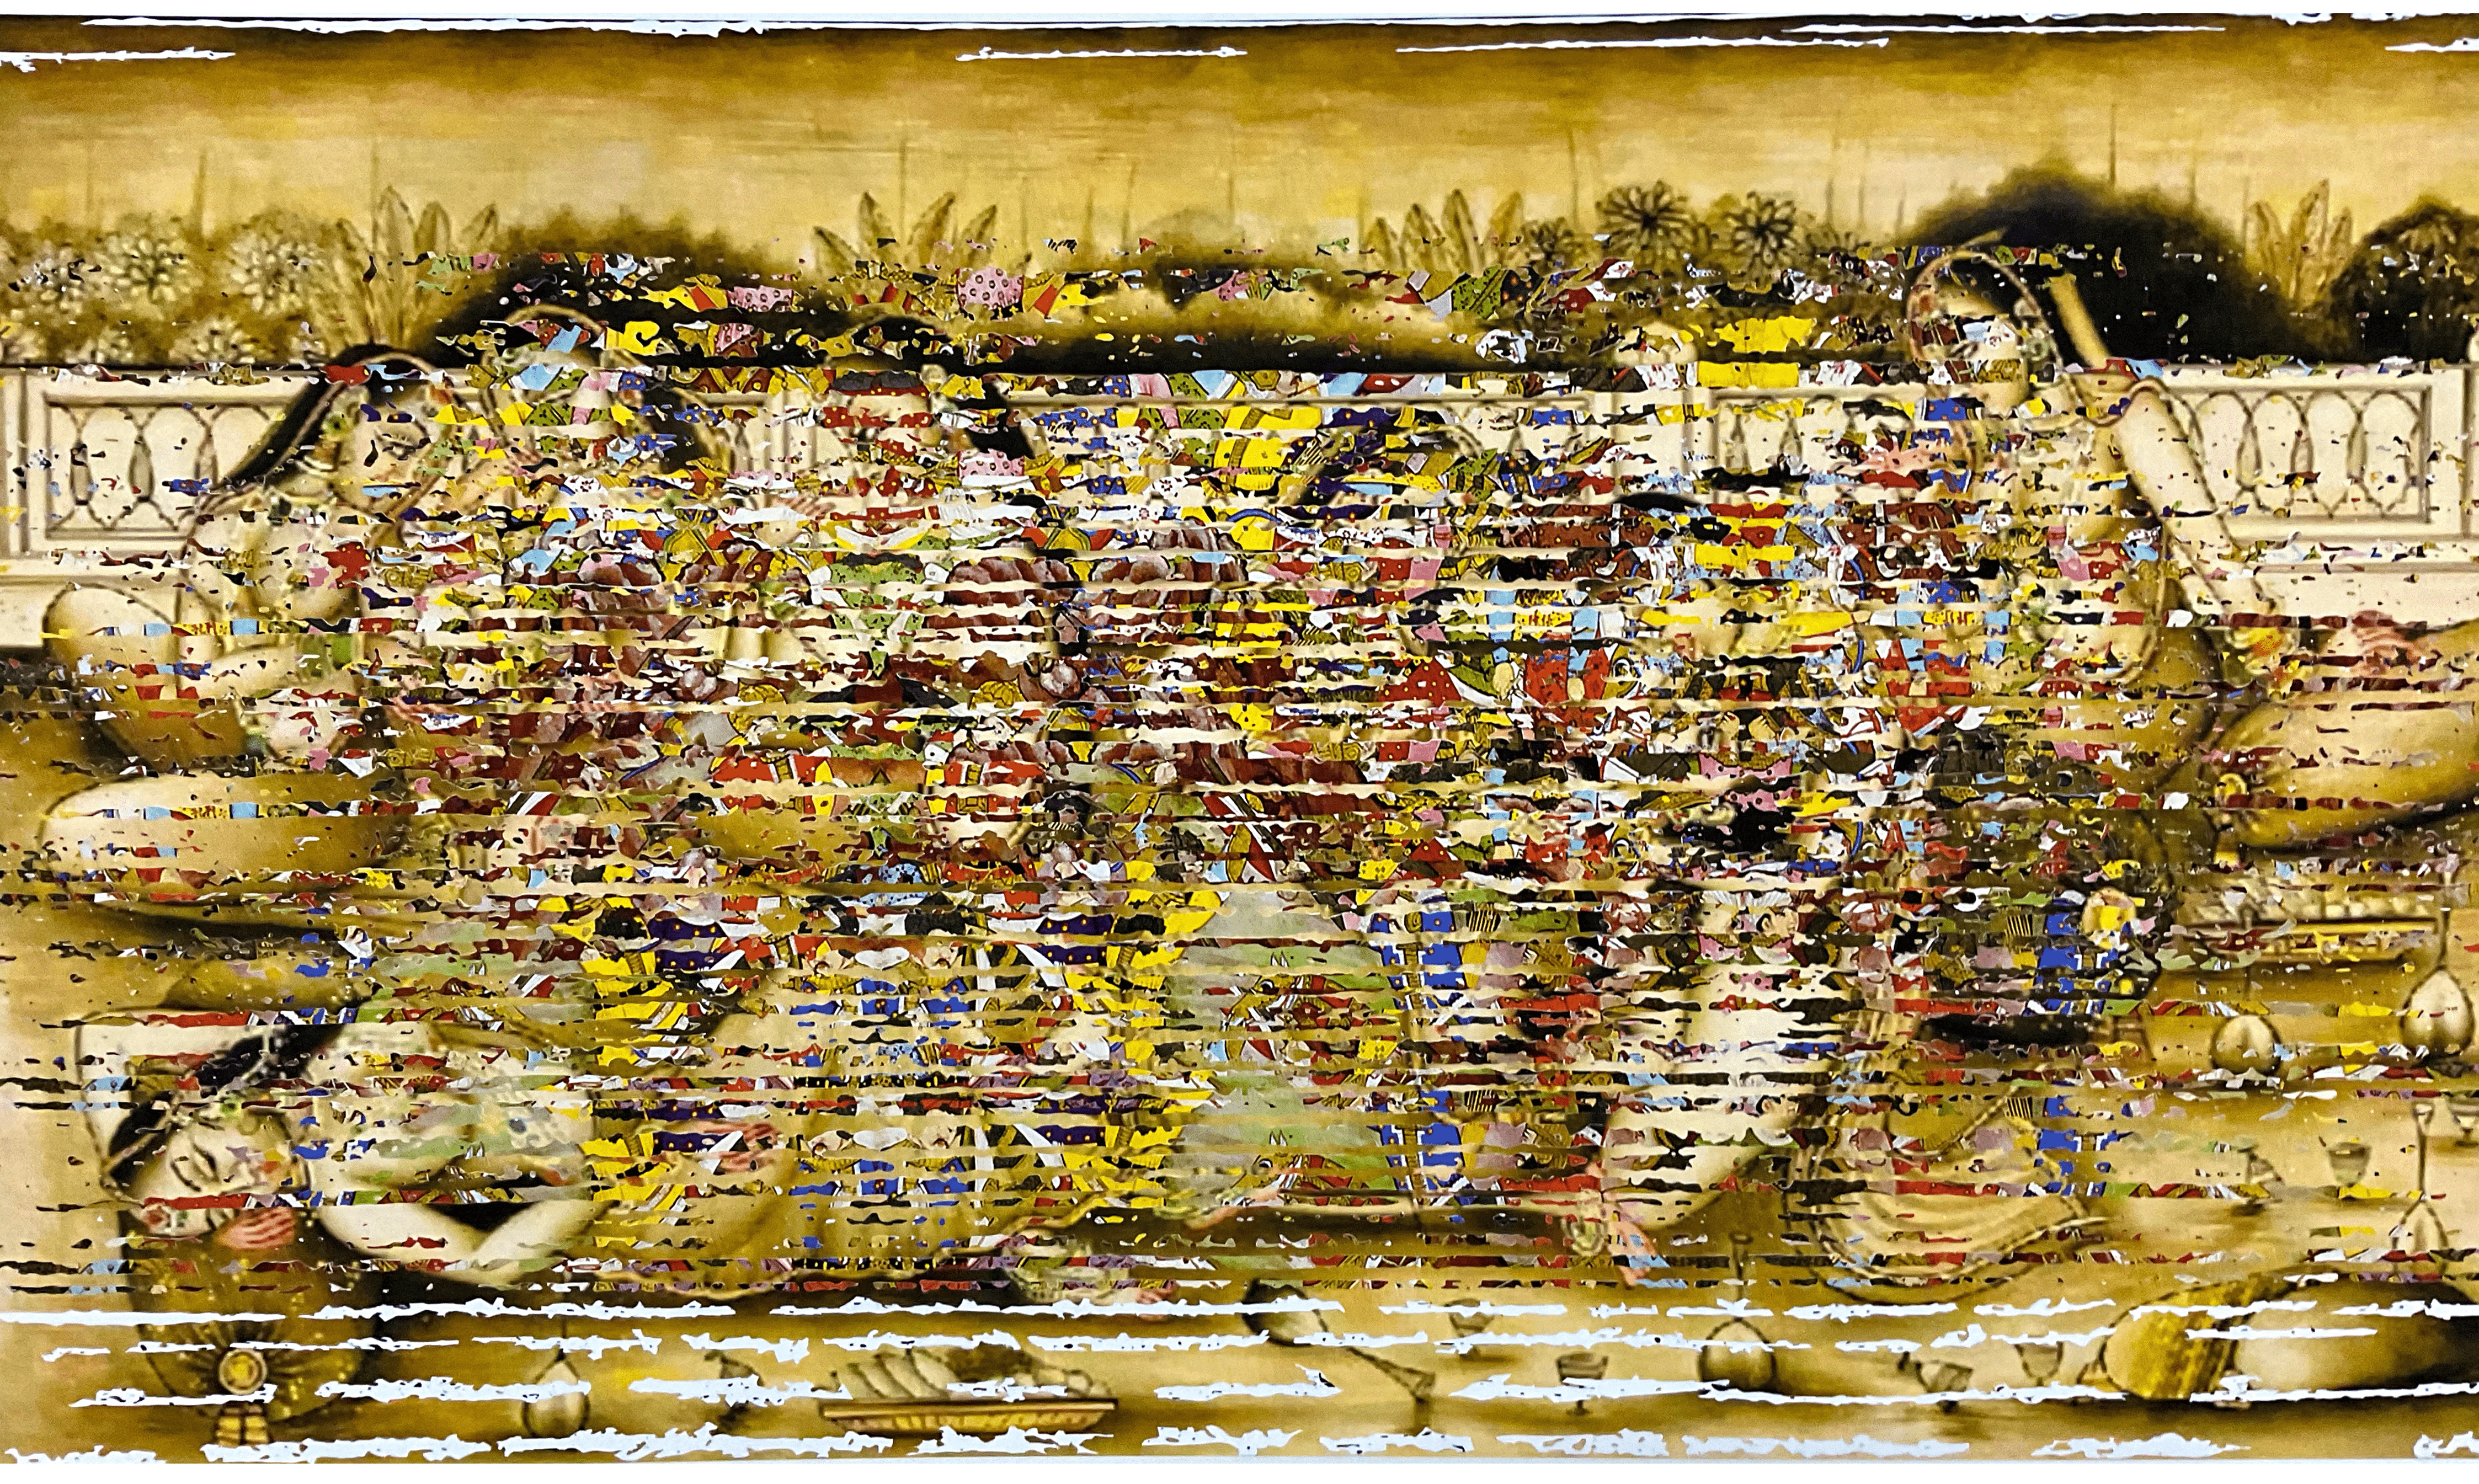 Title: Swad Agaya Badshaho IV<br> Medium: Paper Collage On Paper<br> Size: 23x40 inches